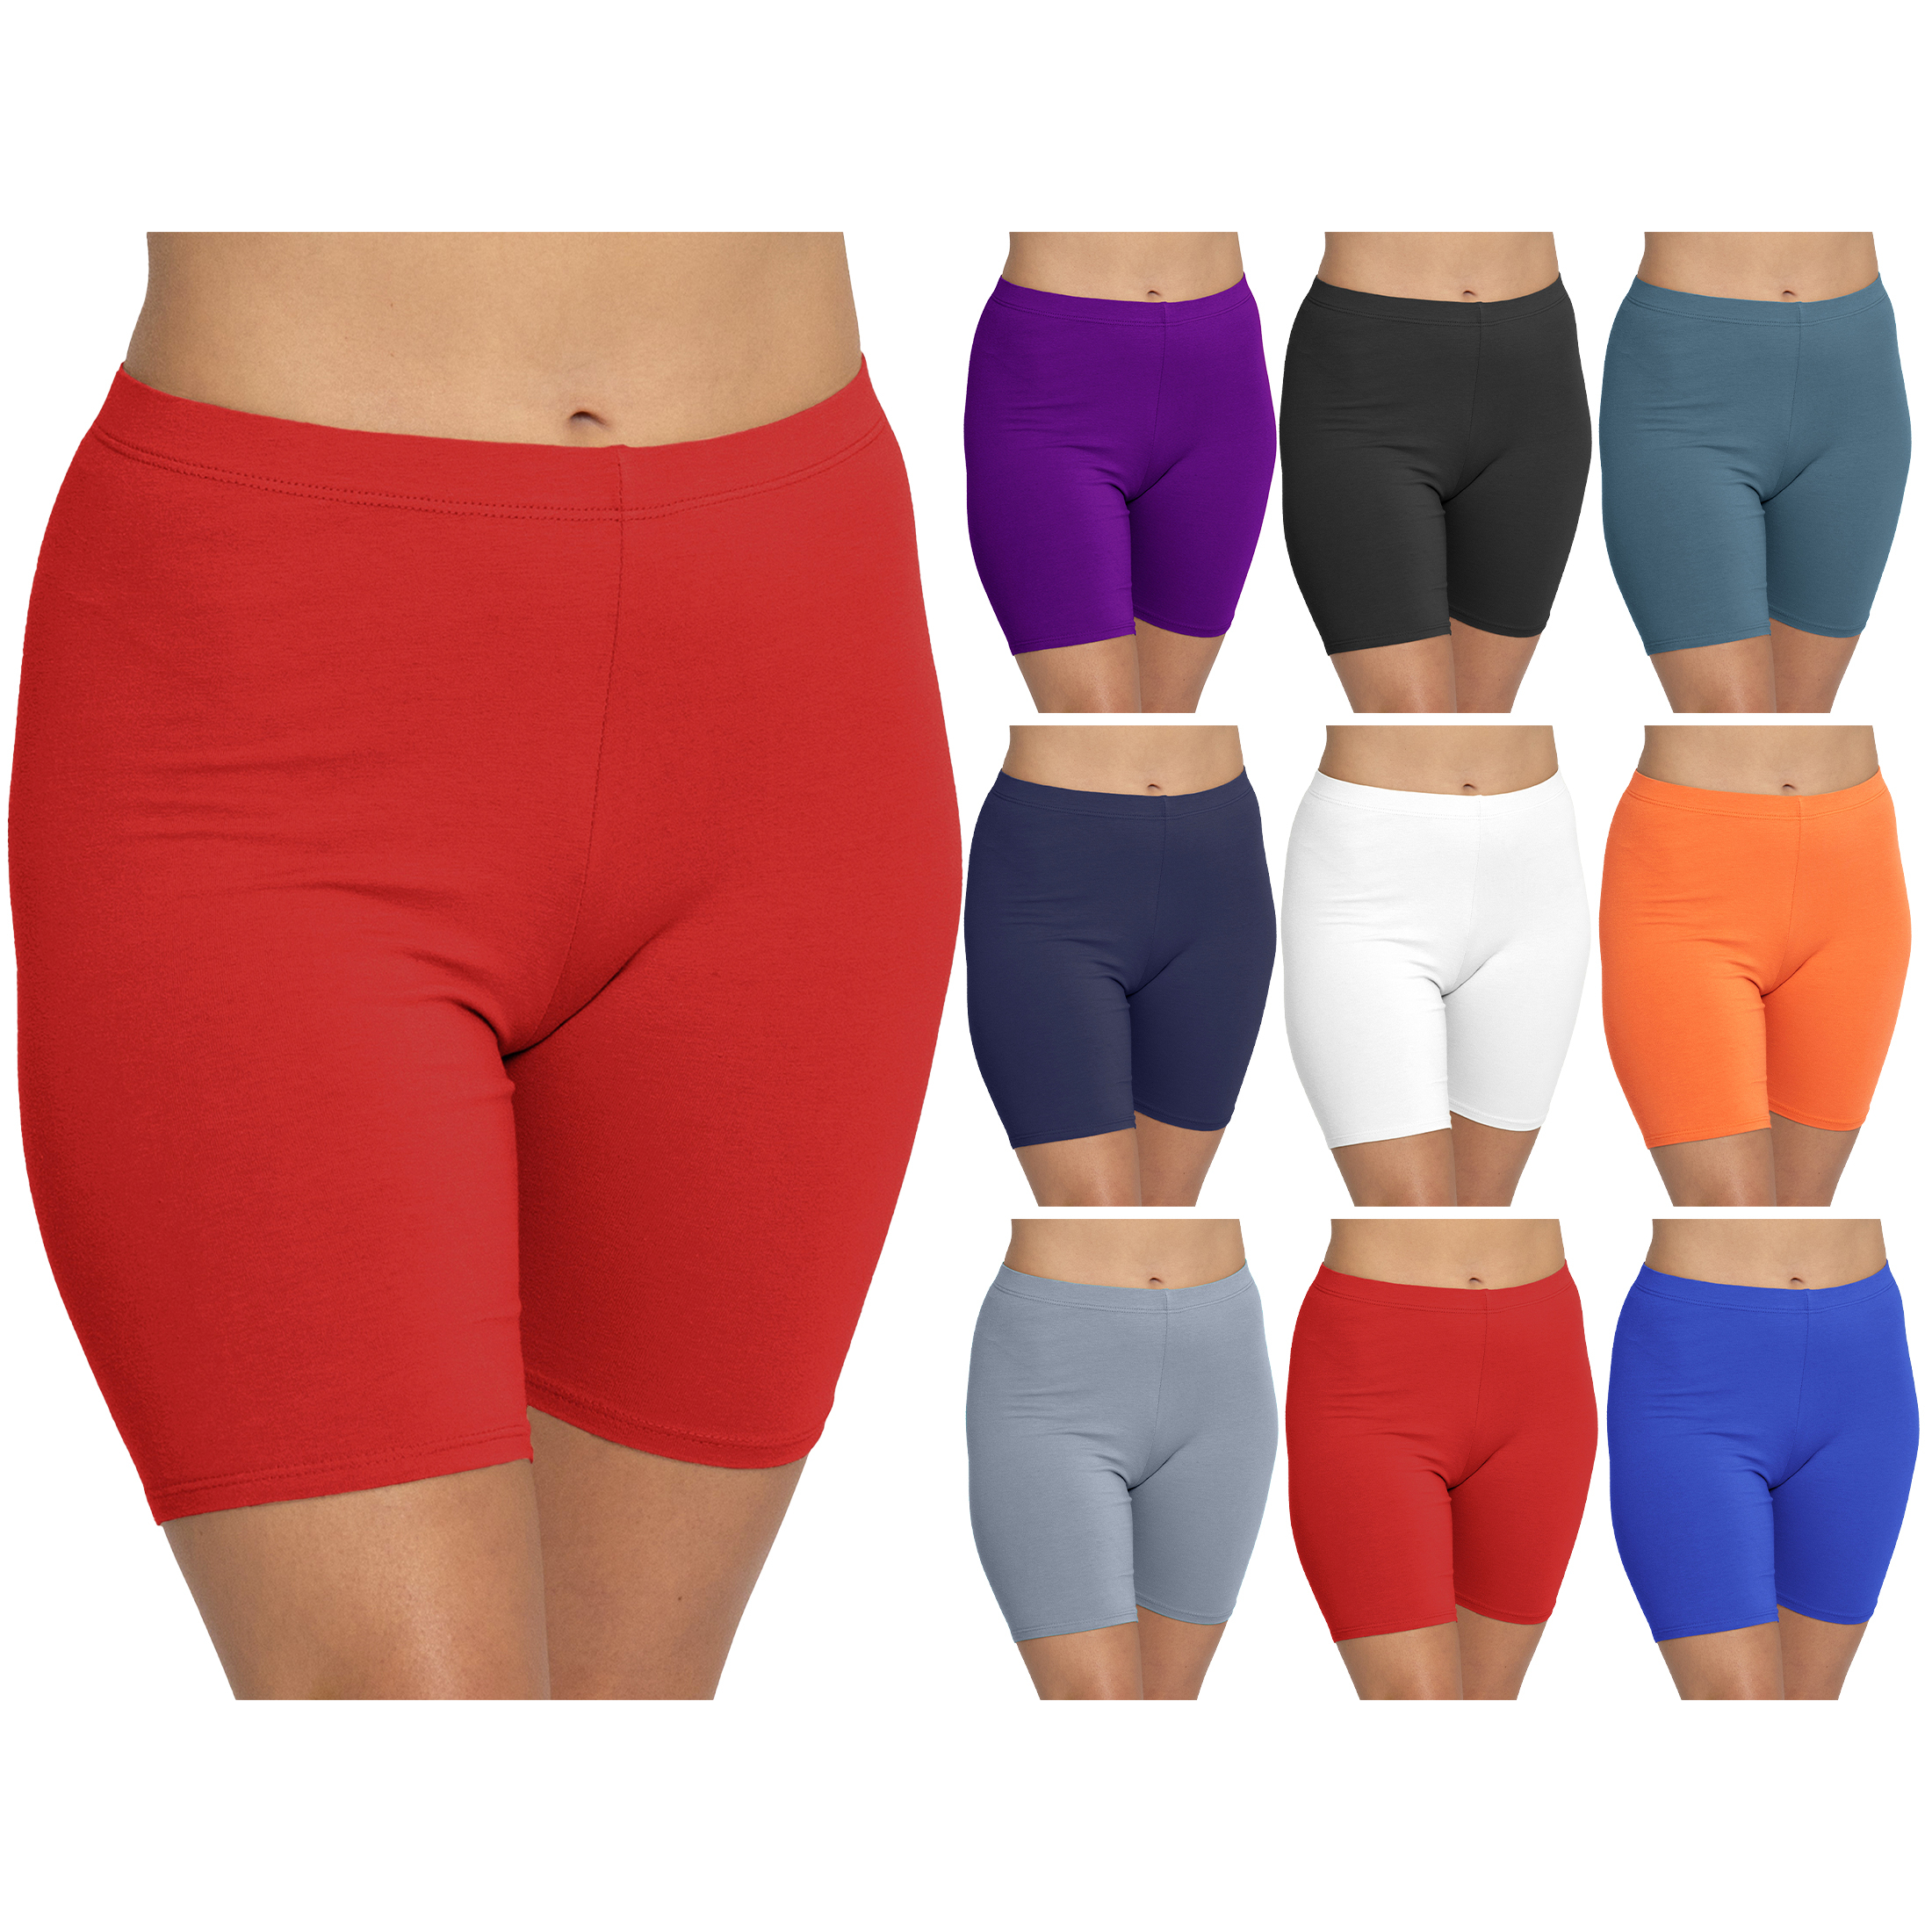 4-Pack Women's Low Rise Biker Bermuda Shorts Leggings For Workout Gym Yoga Running Soft Tummy Control Stretchy Comfy Athletic Summer Shorts